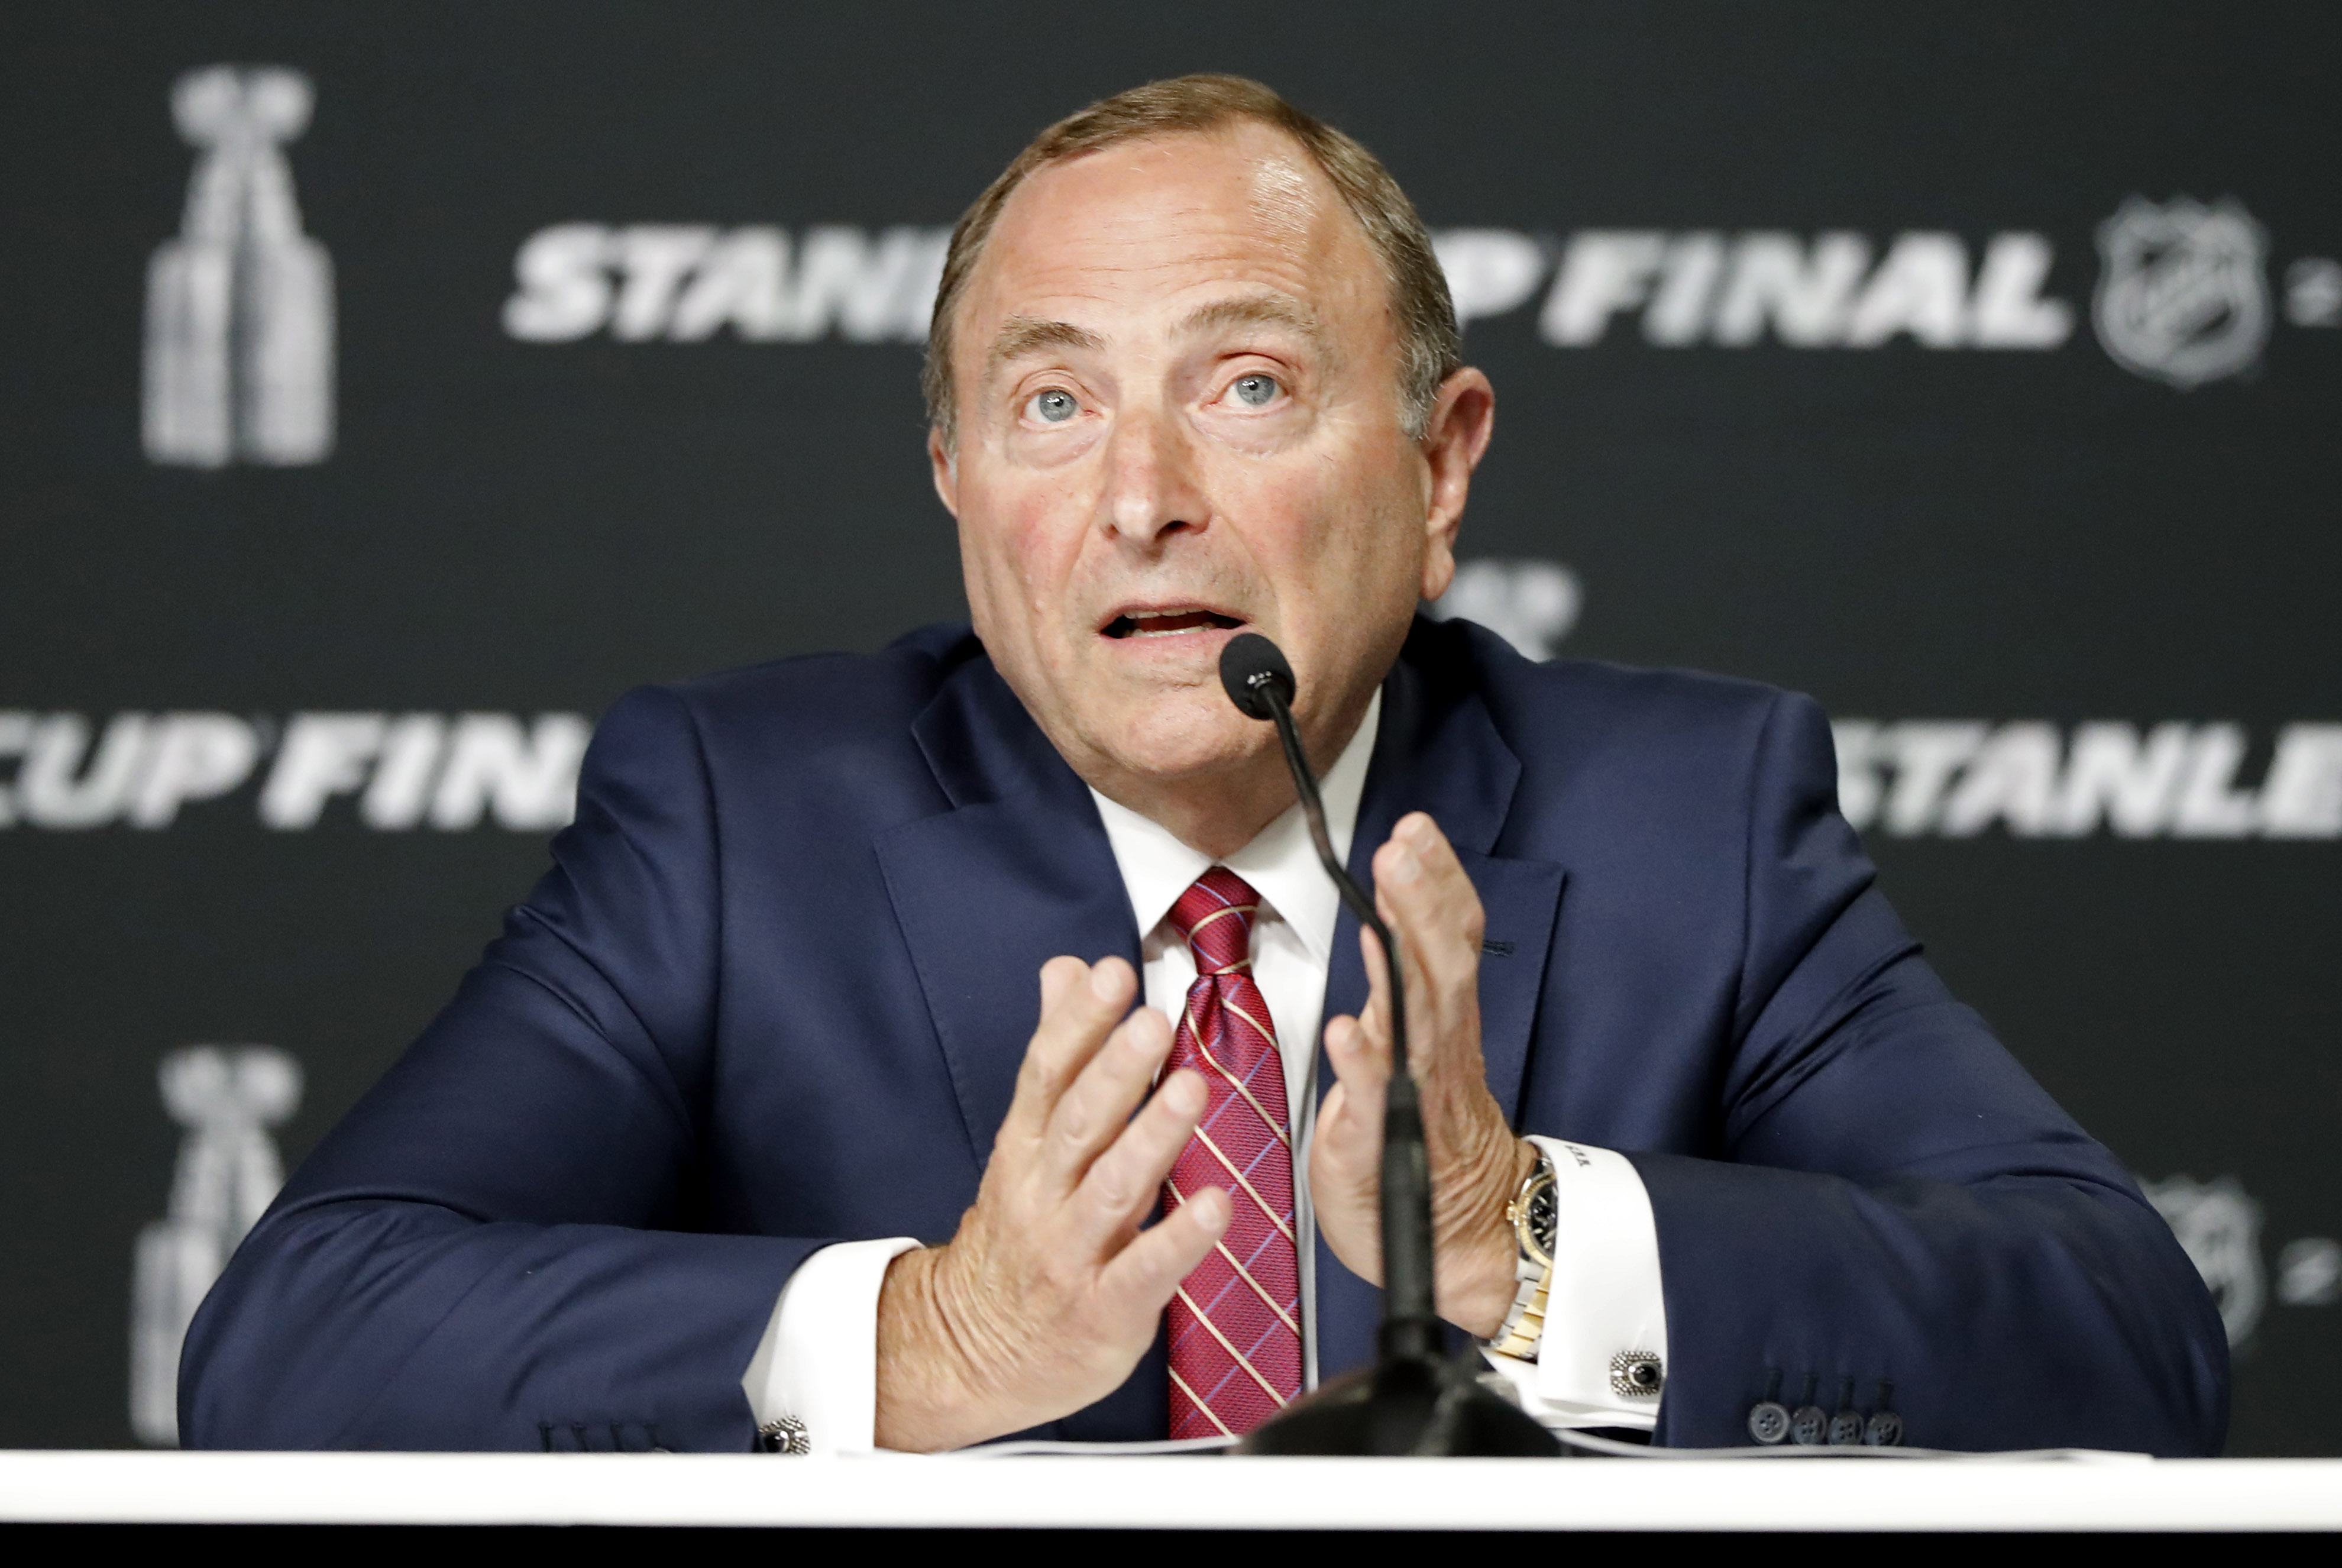 NHL's Gary Bettman Says Players Will Decide on Olympic Participation